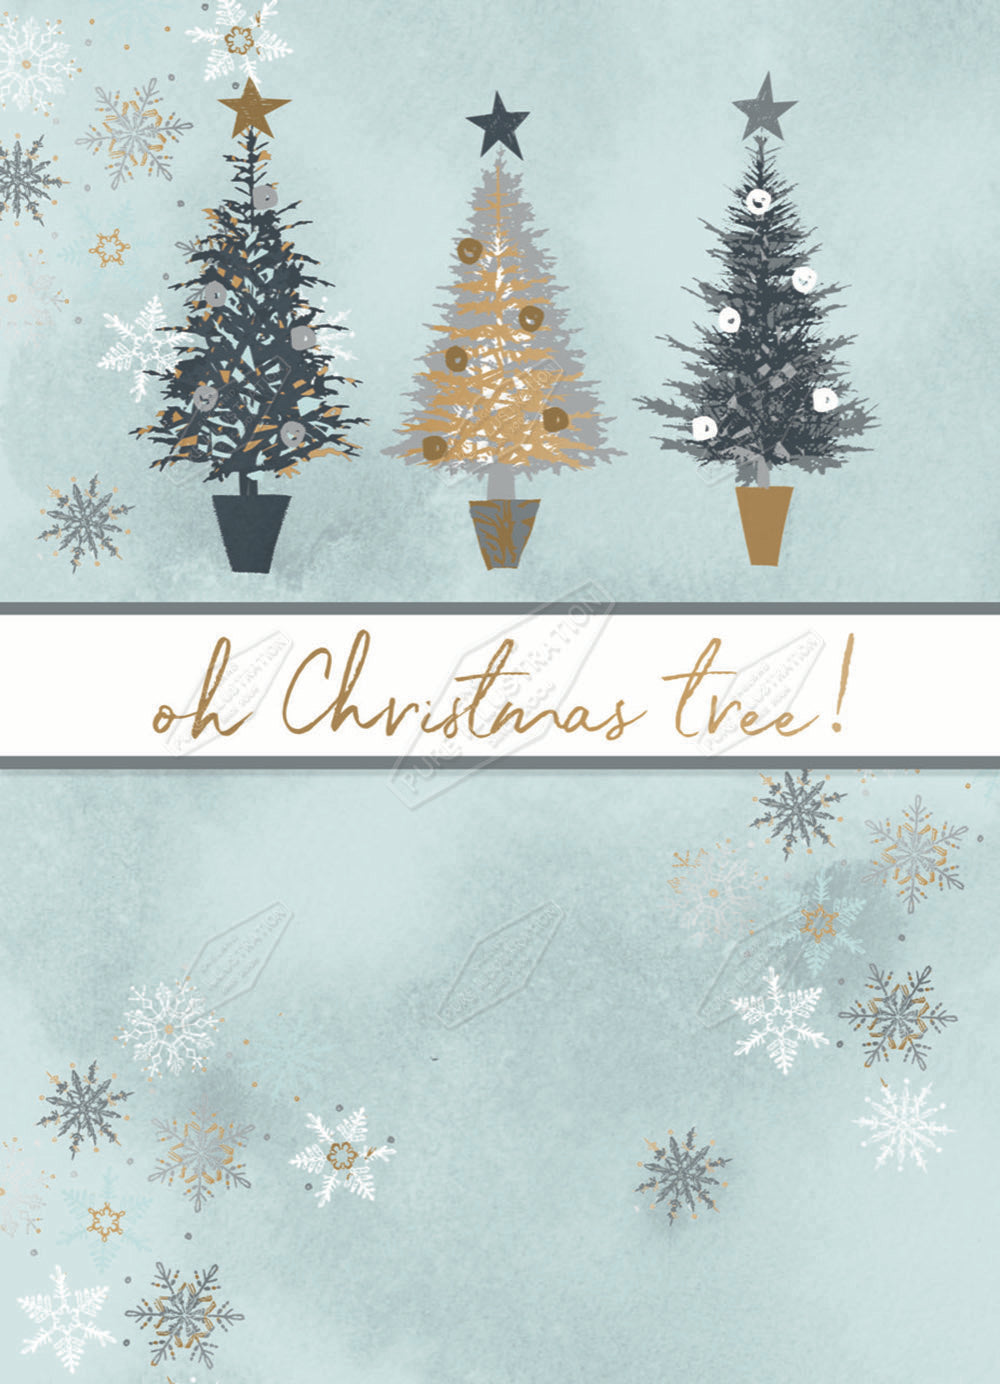 00032241KSP- Kerry Spurling is represented by Pure Art Licensing Agency - Christmas Greeting Card Design